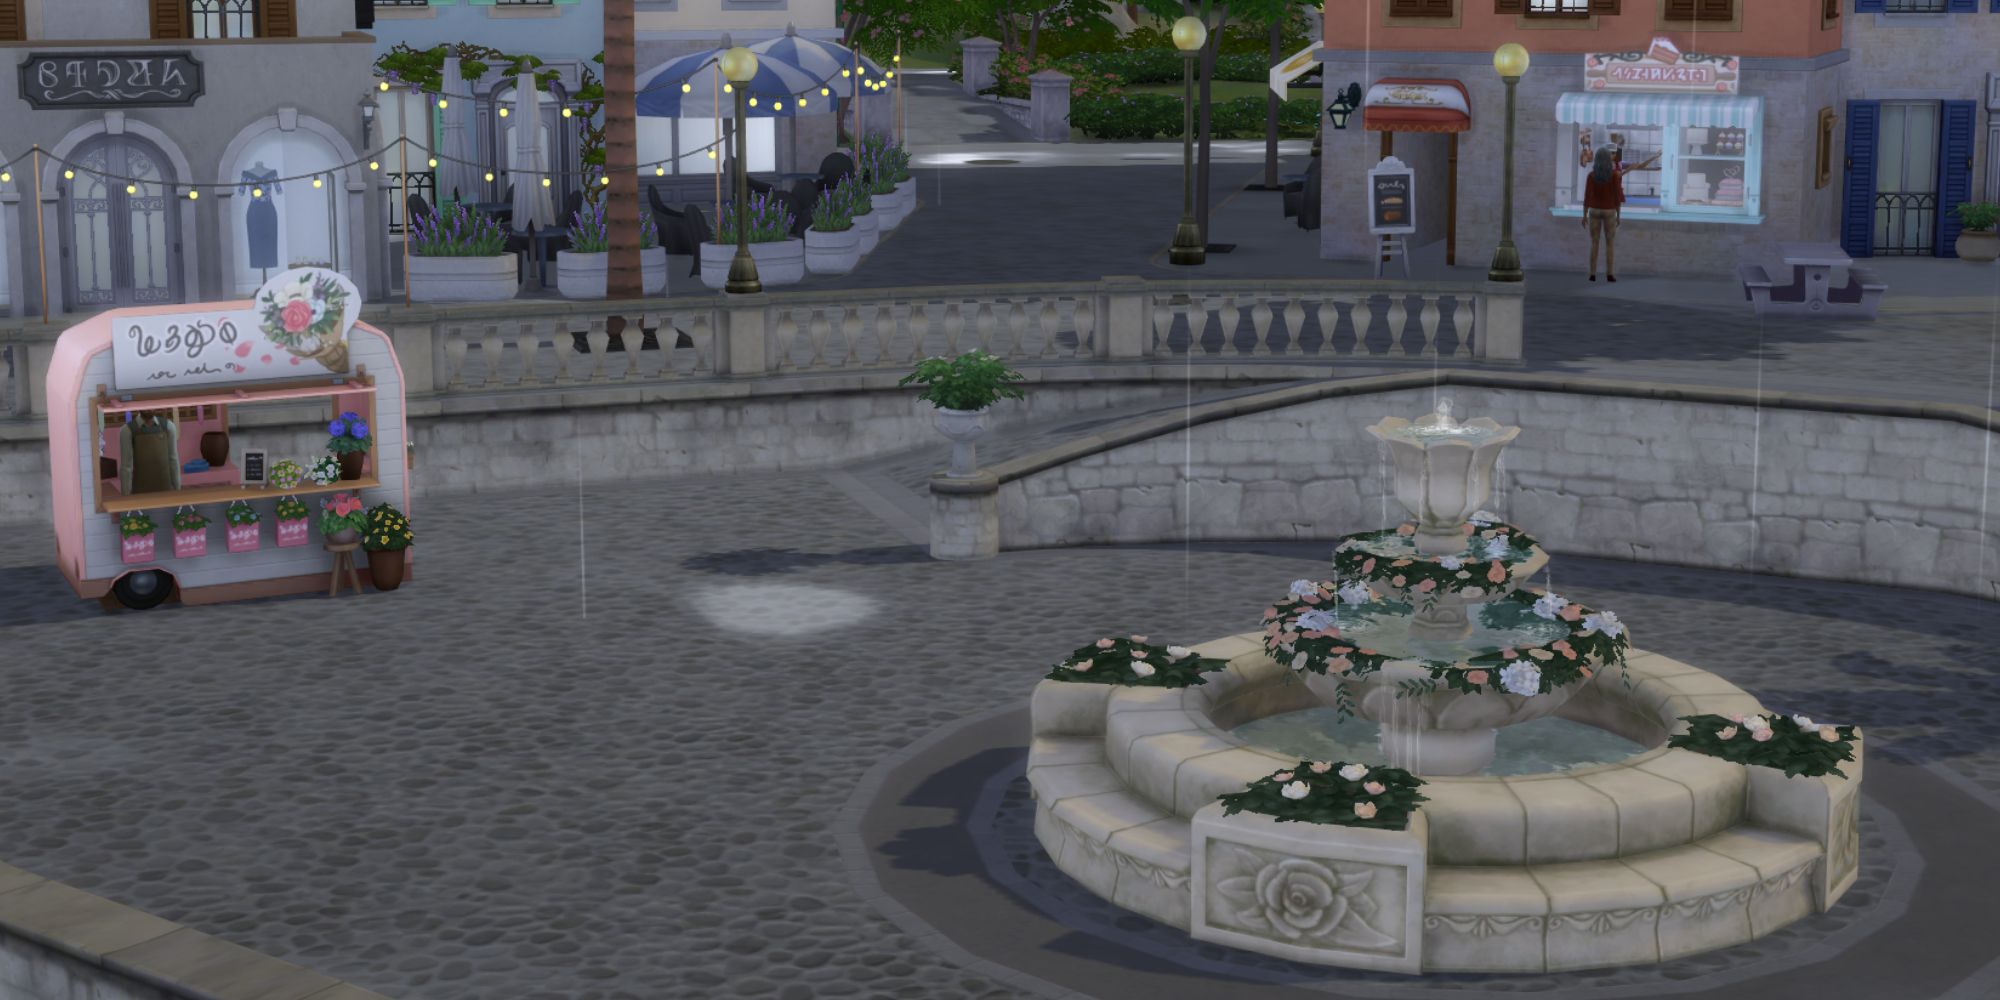 Sims weddings tartosa shops for cake and flowers